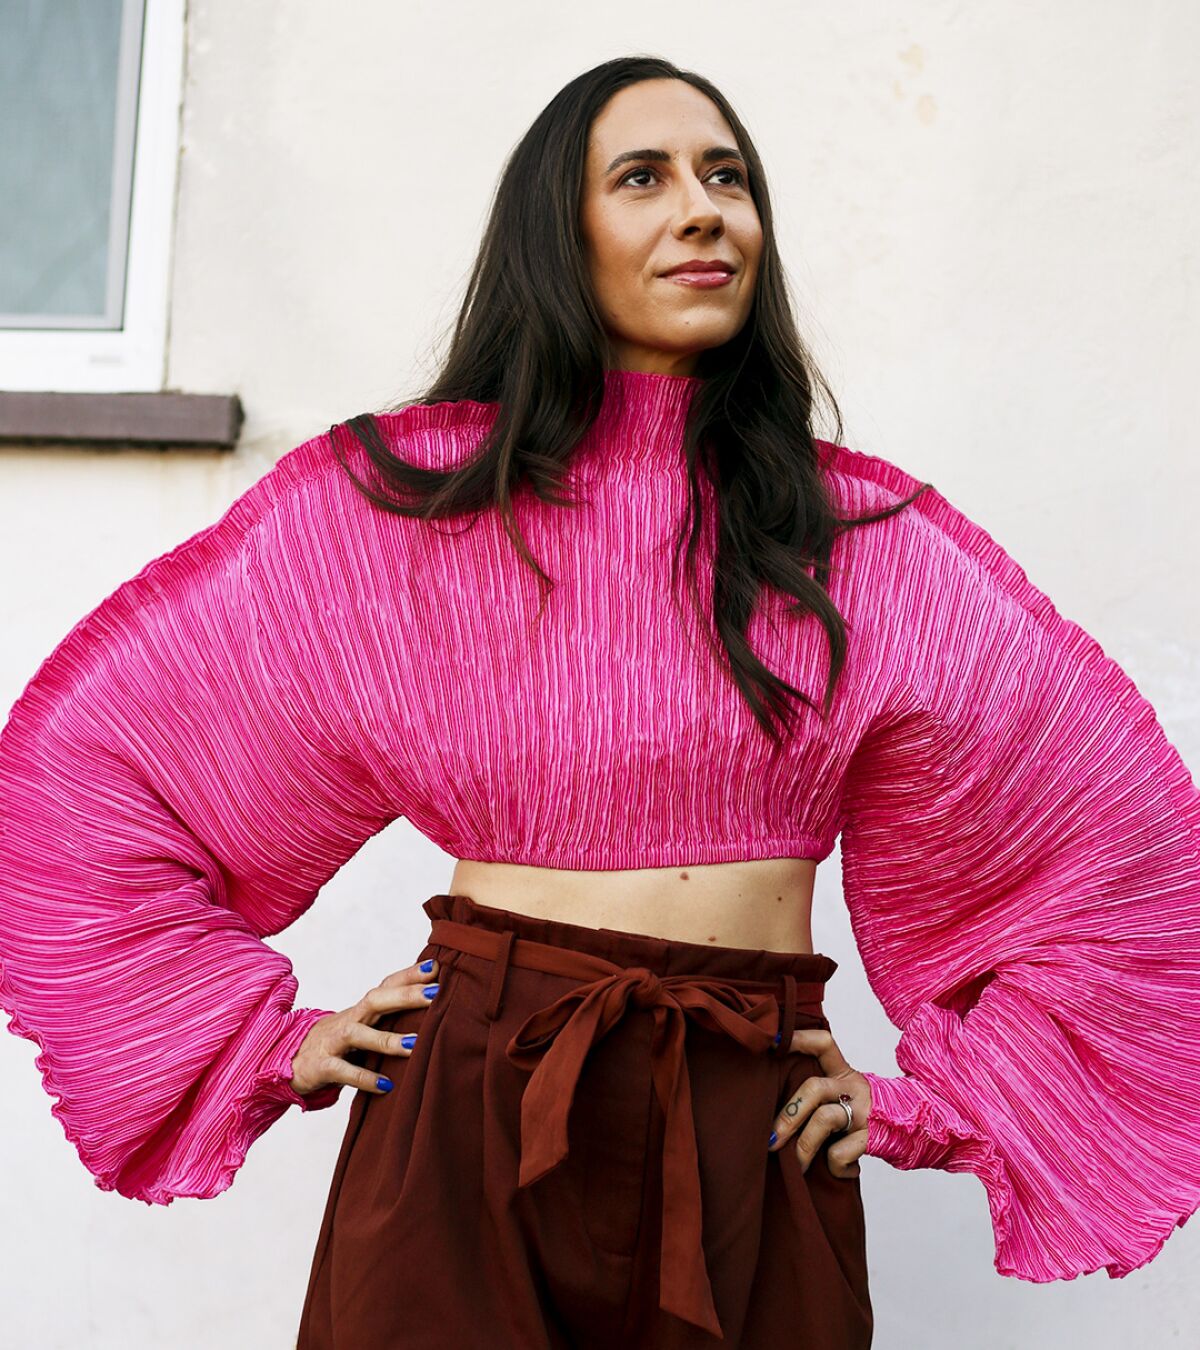 A woman with flowing brunet hair wears a billowy fuschia top and rust-colored bottoms.